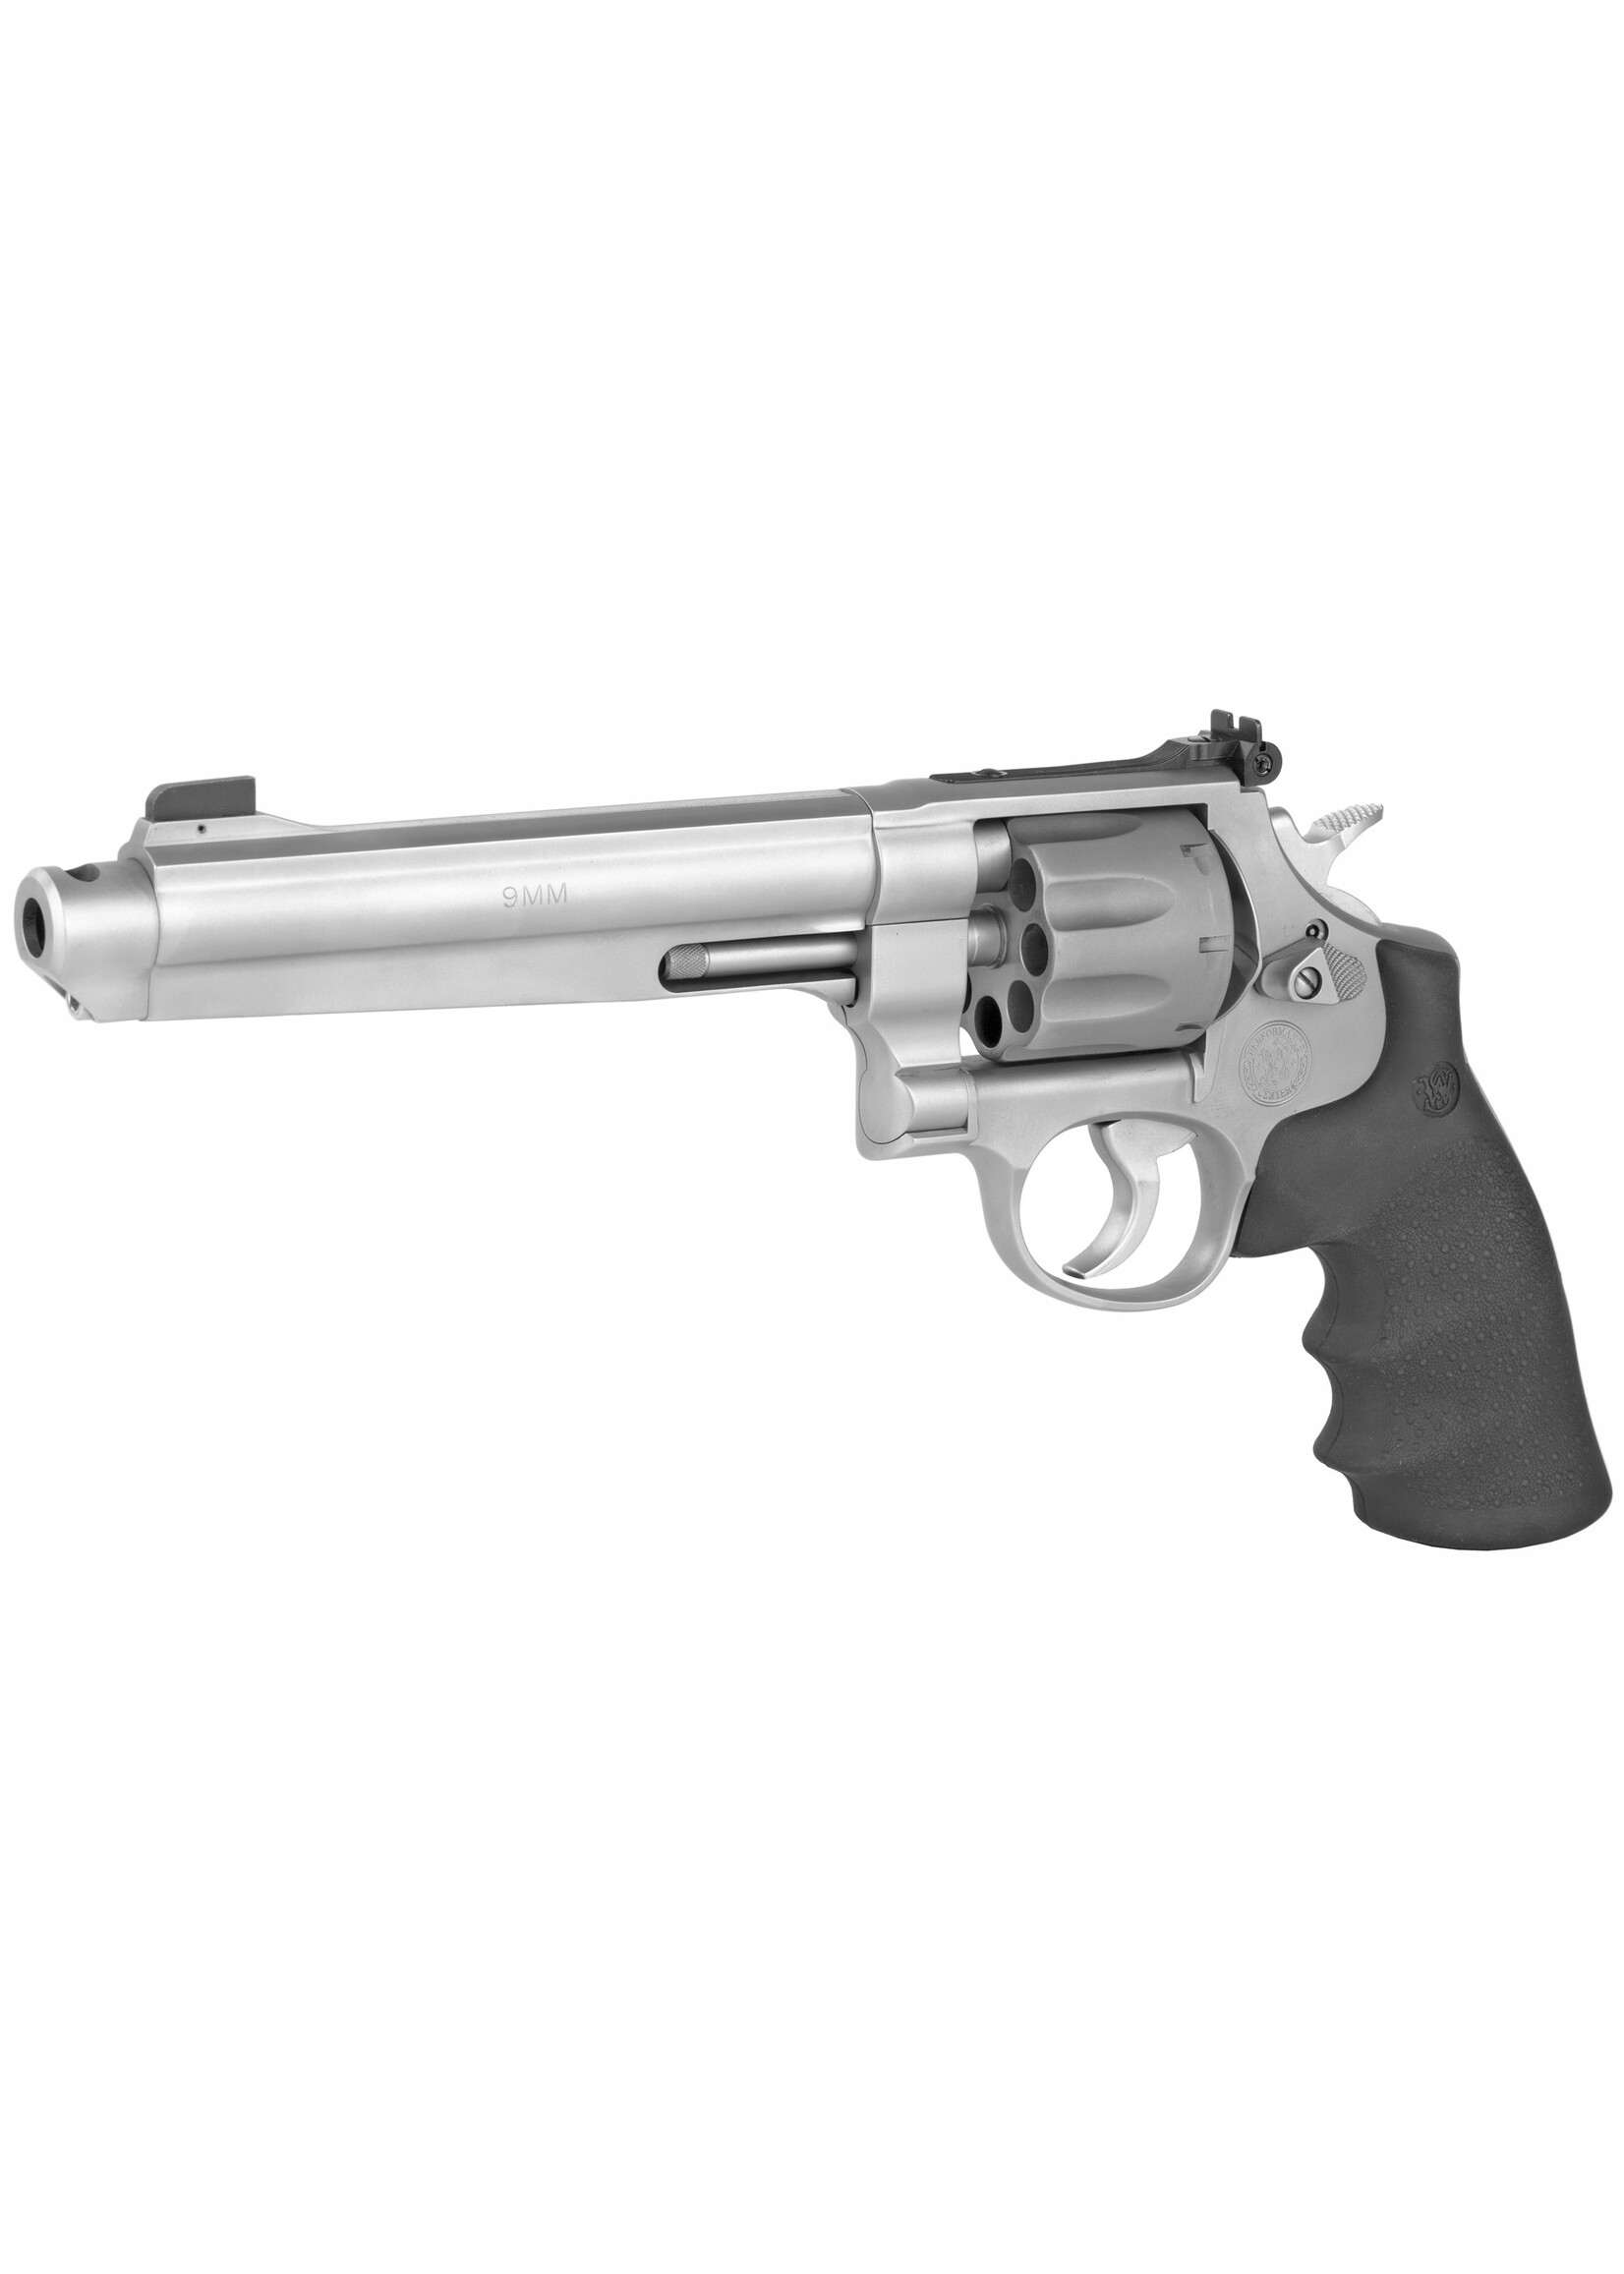 SMITH & WESSON MODEL 929 PC 9MM 8RD 6.5"